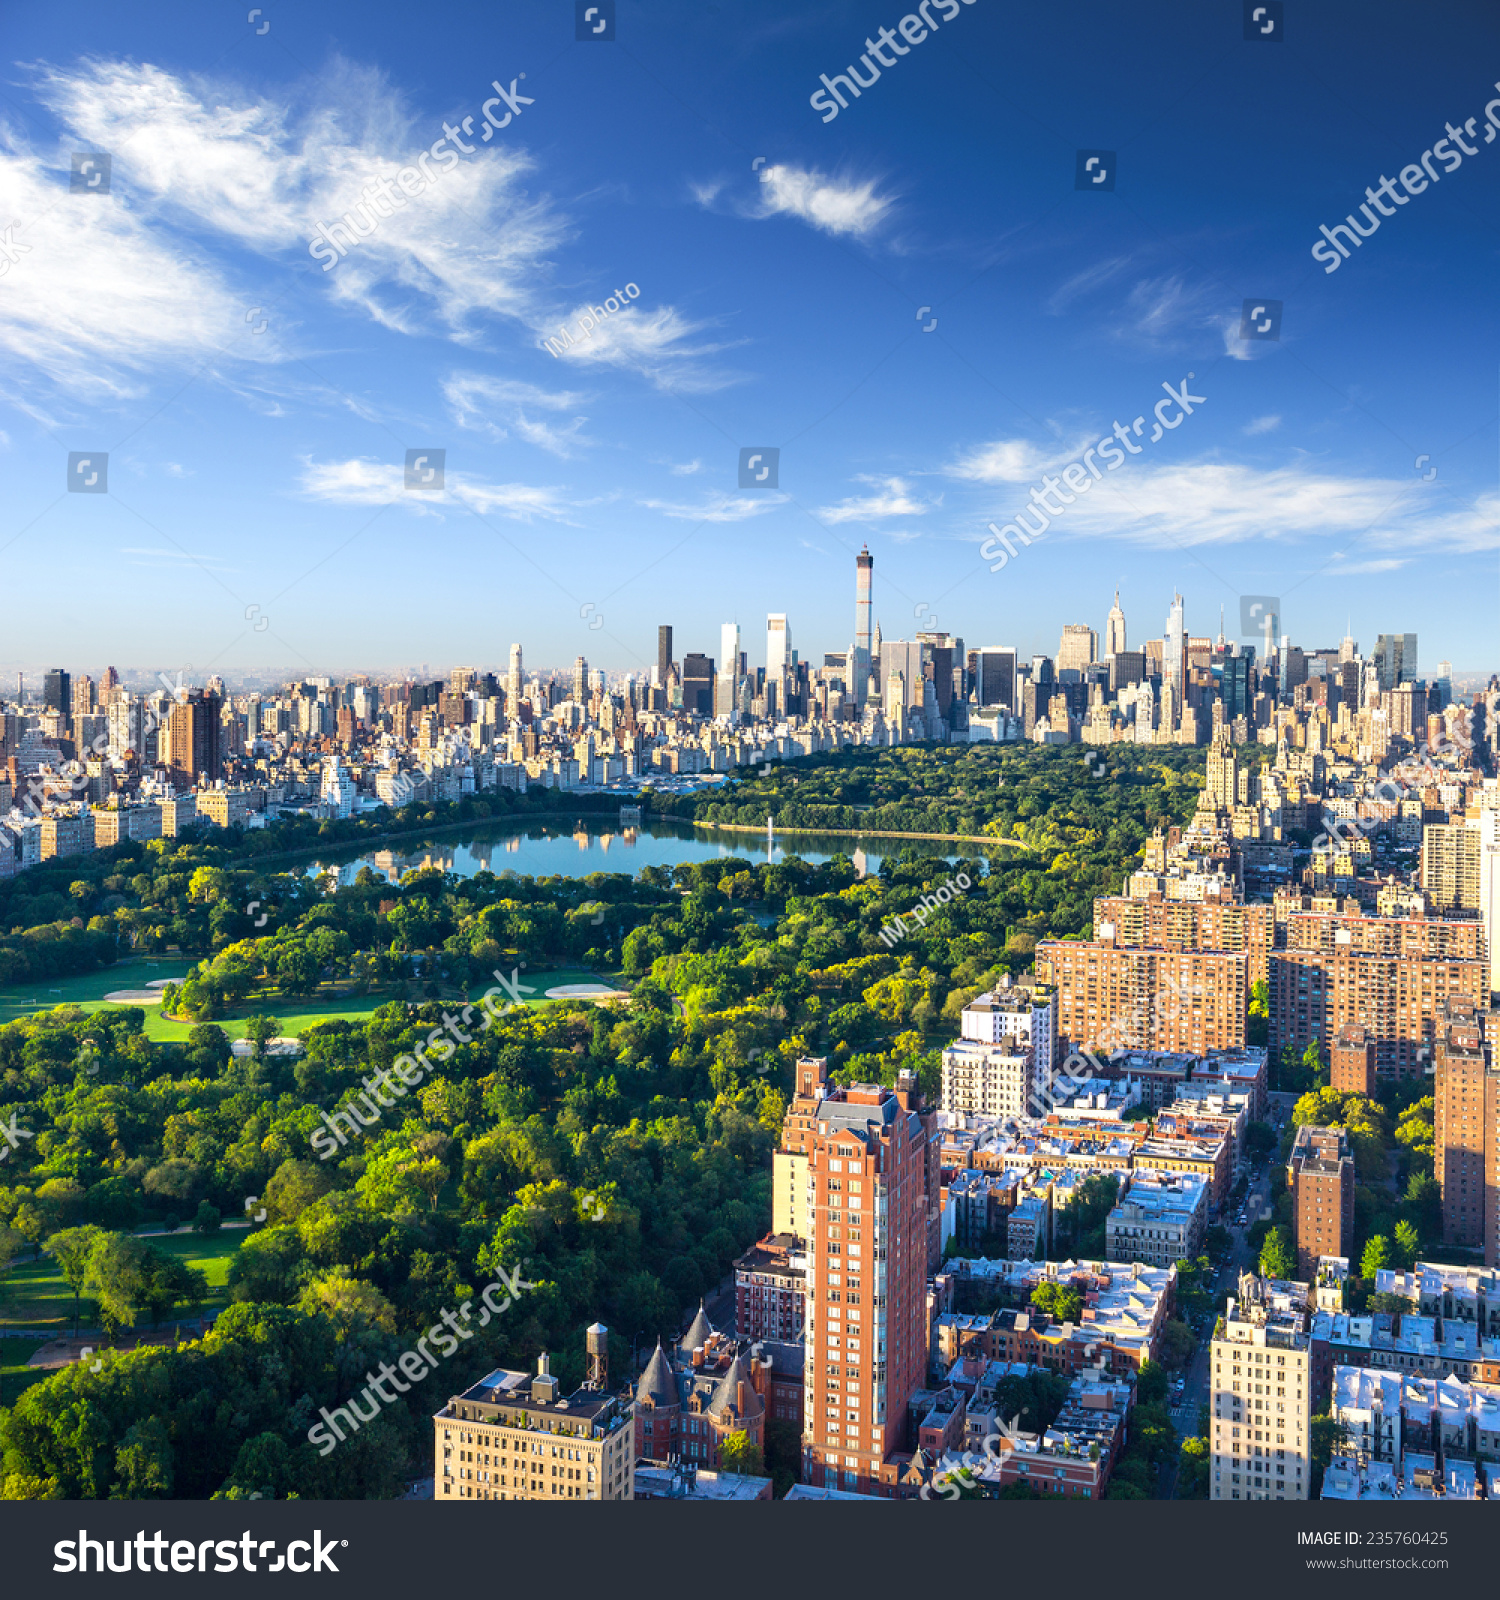 Collection 100+ Images Aerial View Of New York City Full HD, 2k, 4k